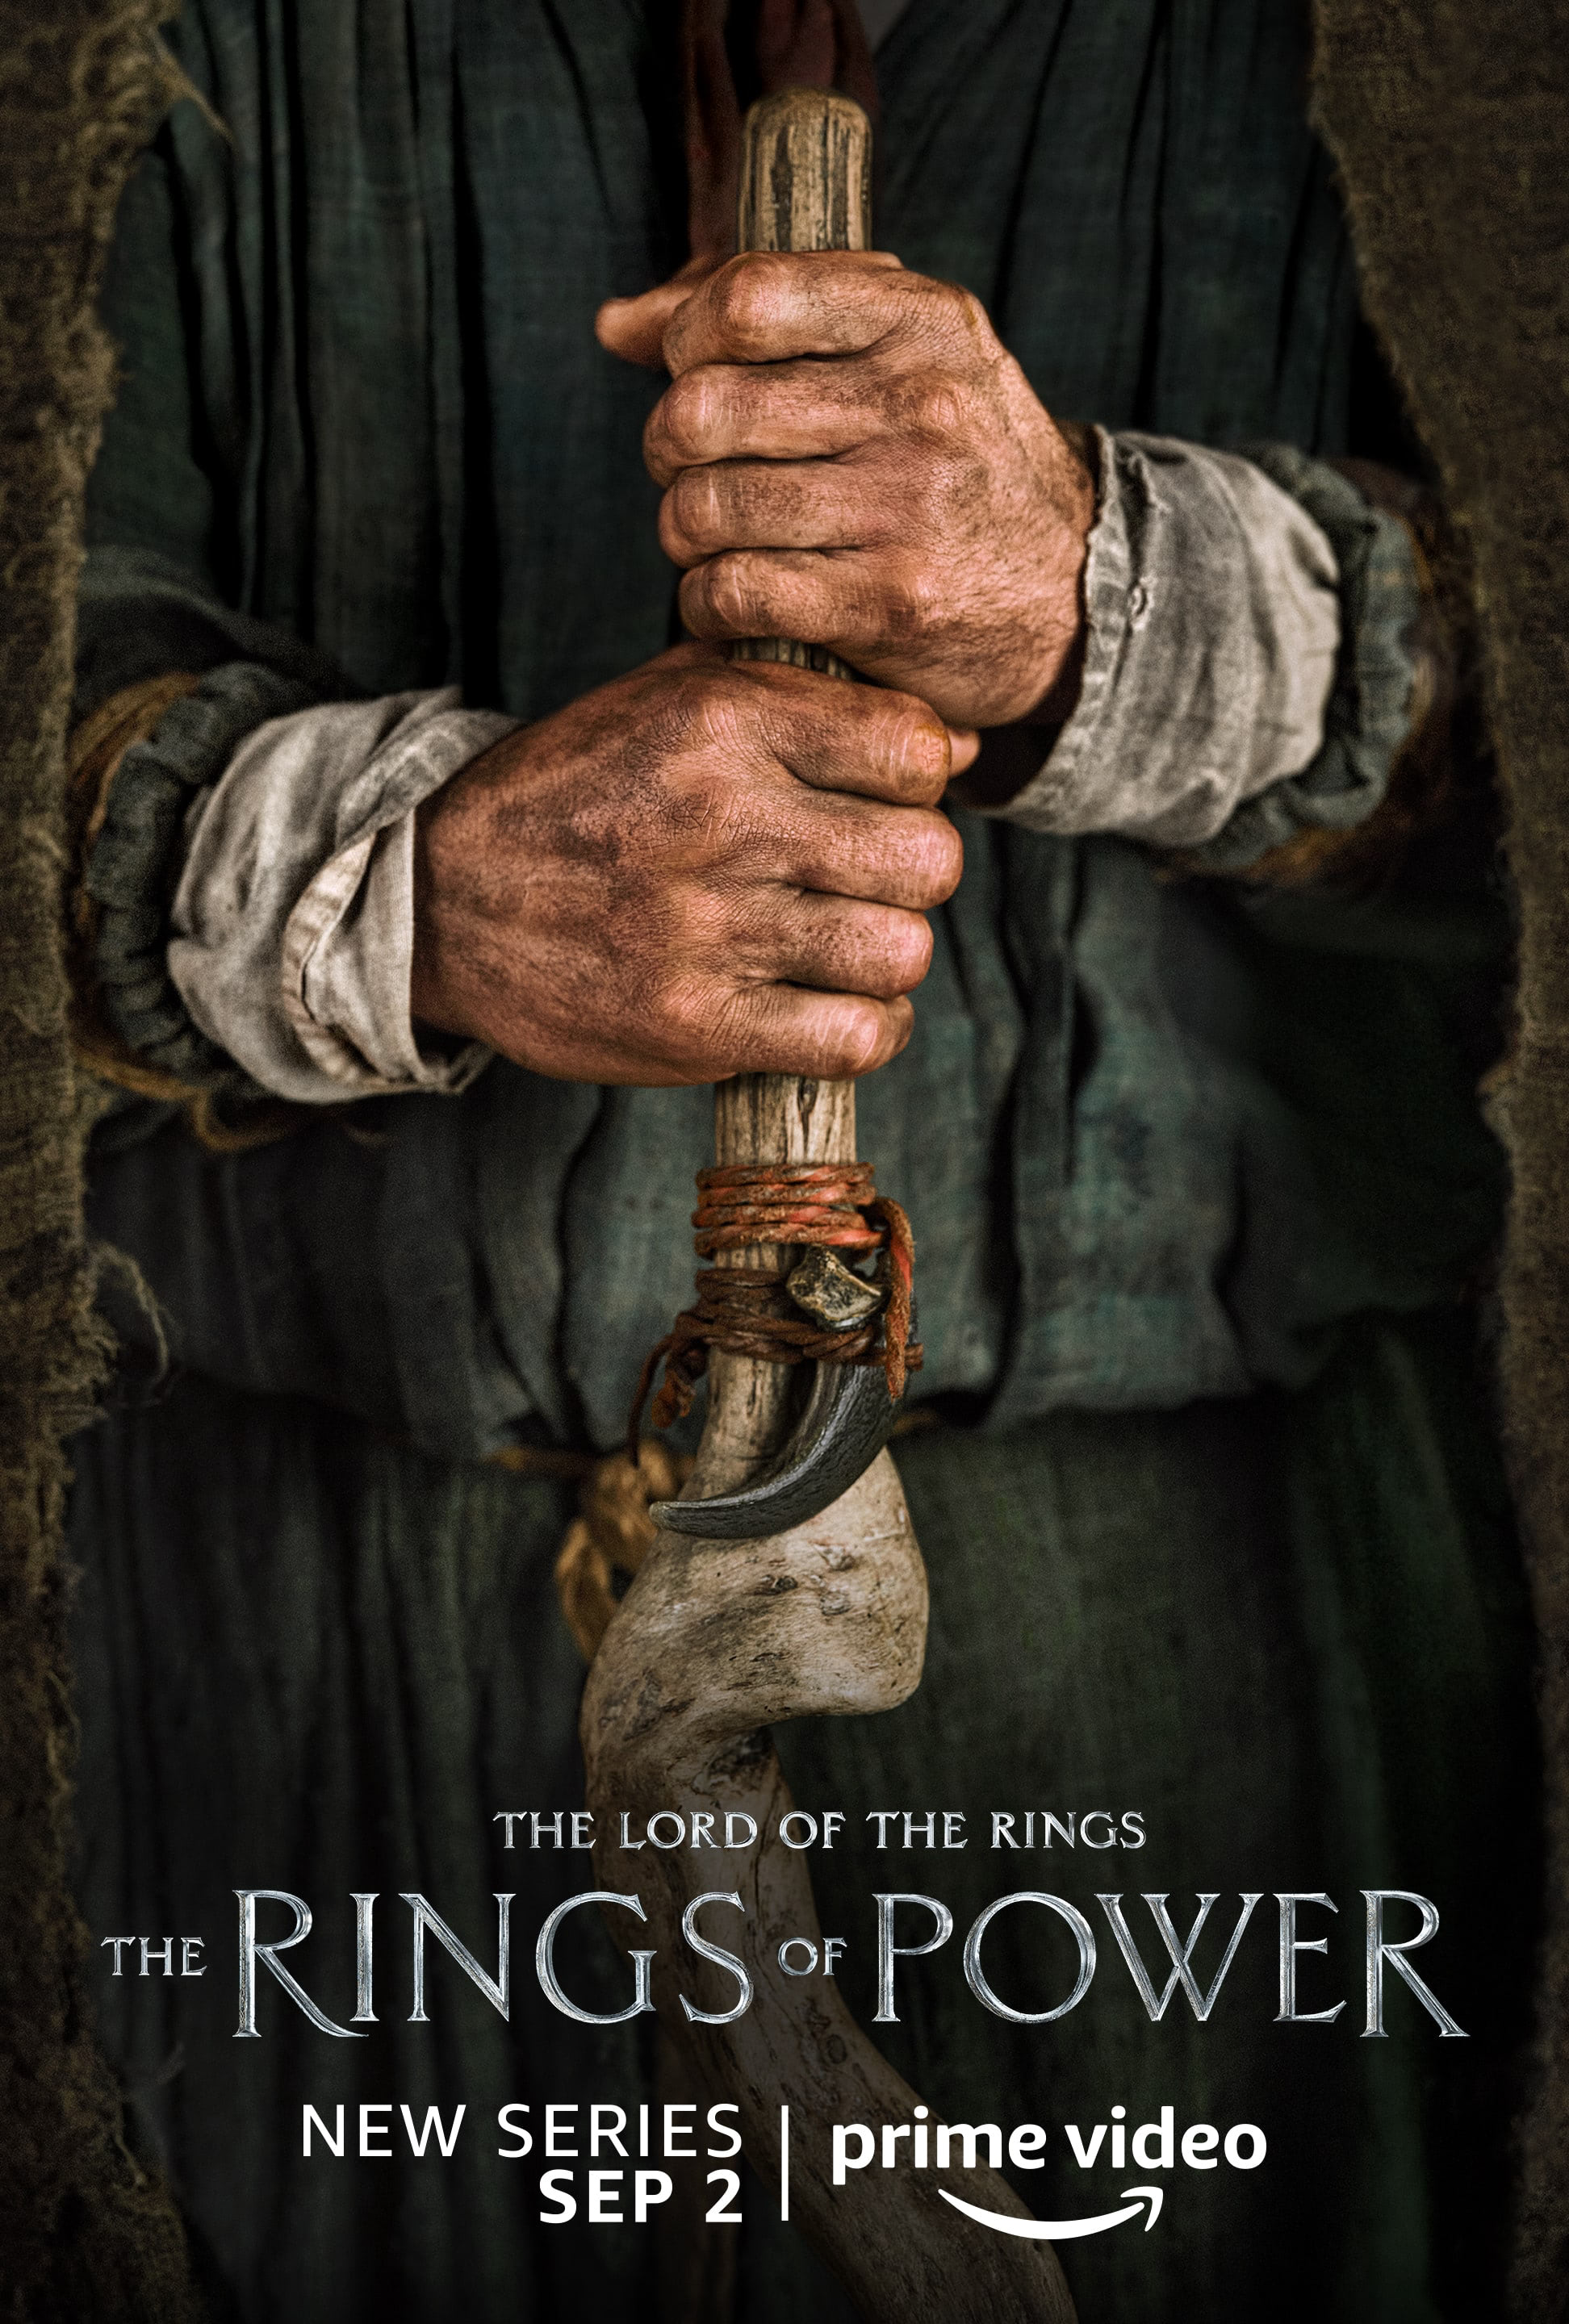 movie news, Prime Video, the lord of the rings, The Rings of Power, trailer